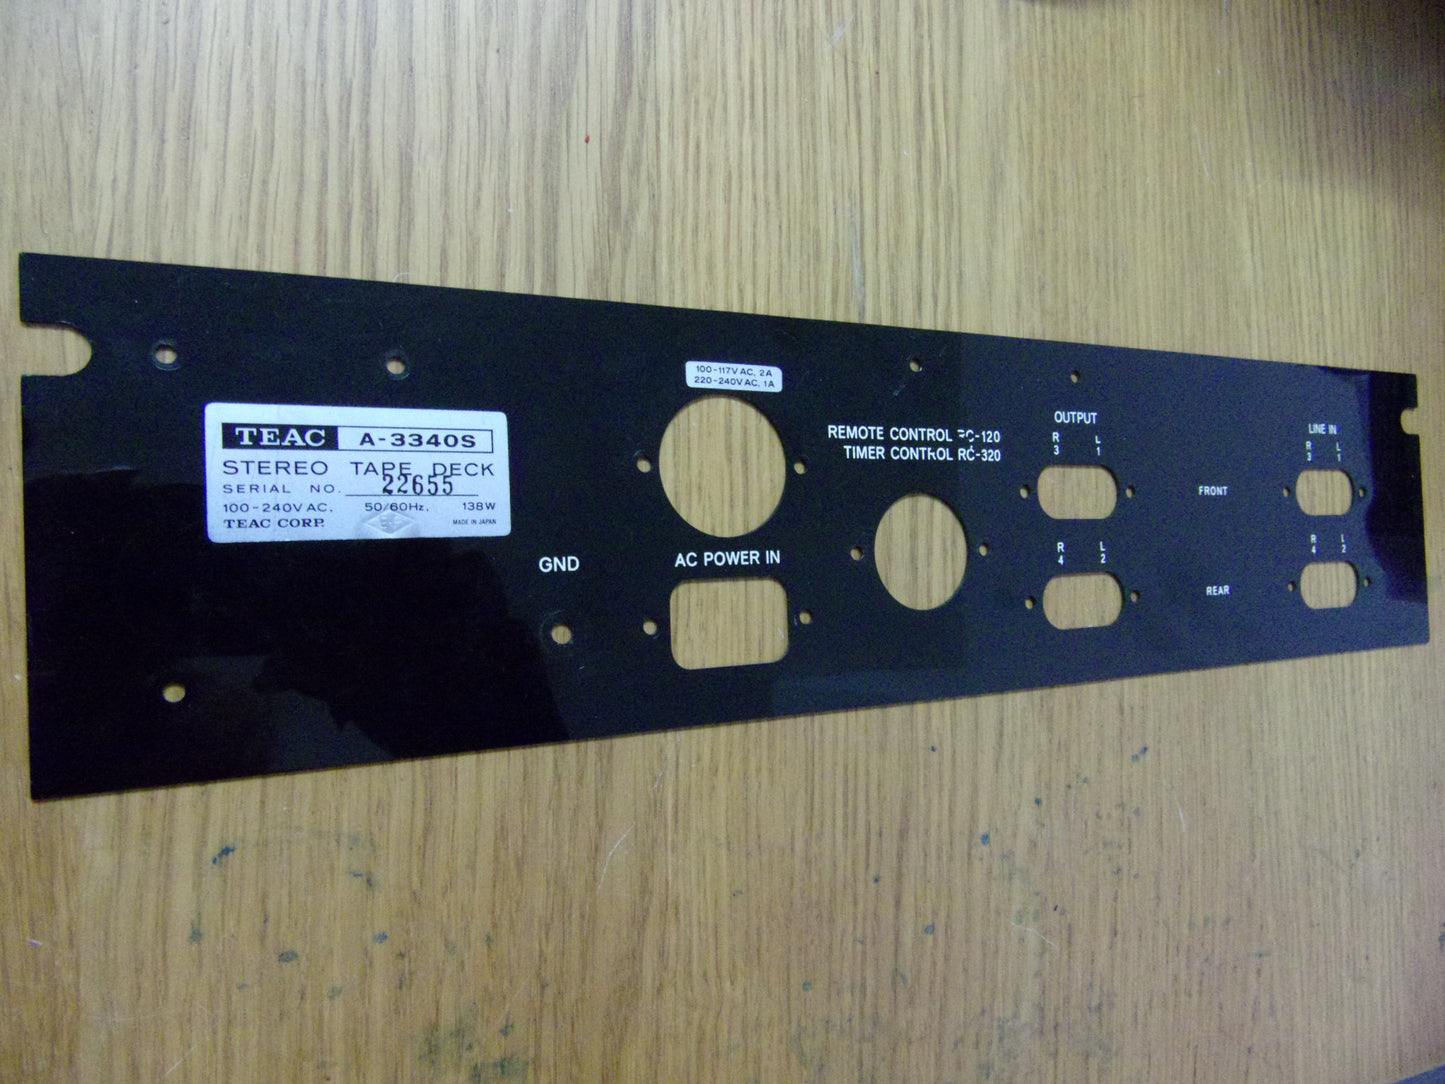 Teac A-3340S rear plastic cosmetic panel